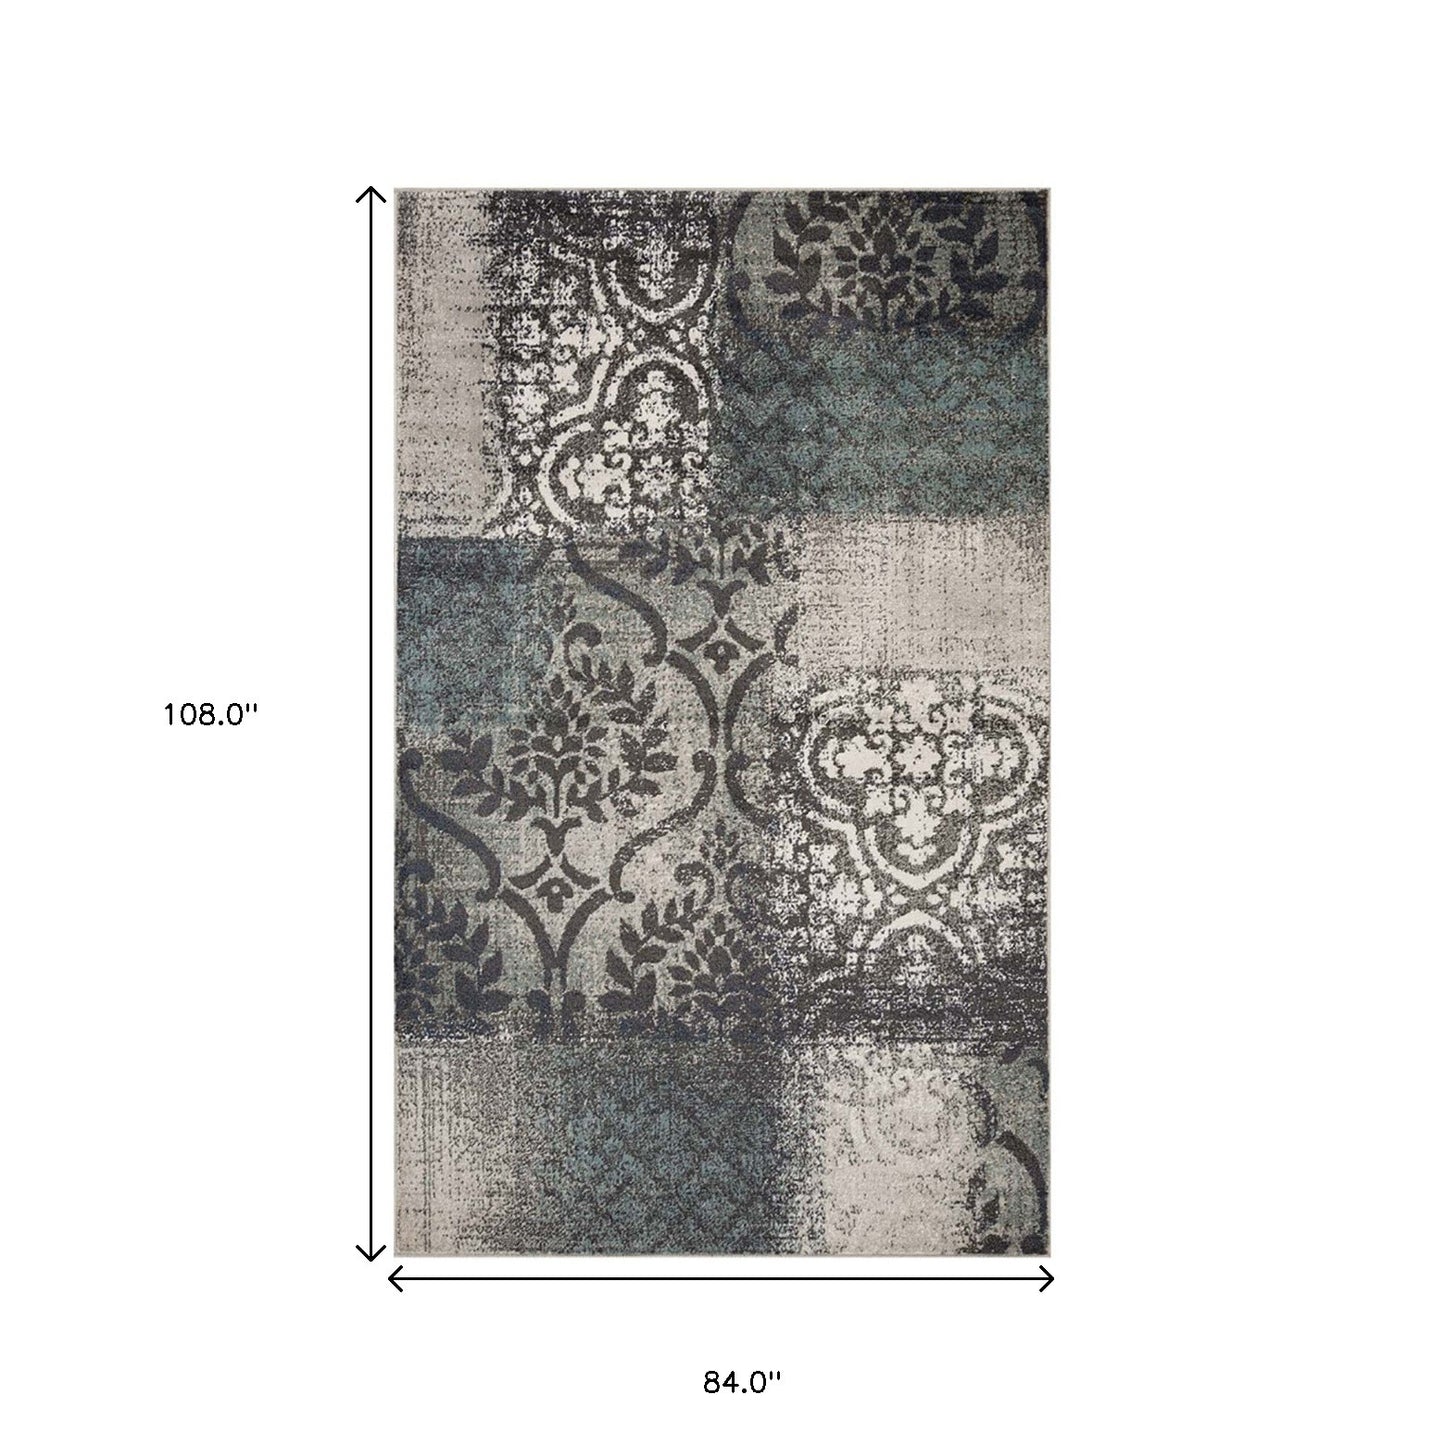 7' X 9' Teal And Gray Damask Distressed Stain Resistant Area Rug